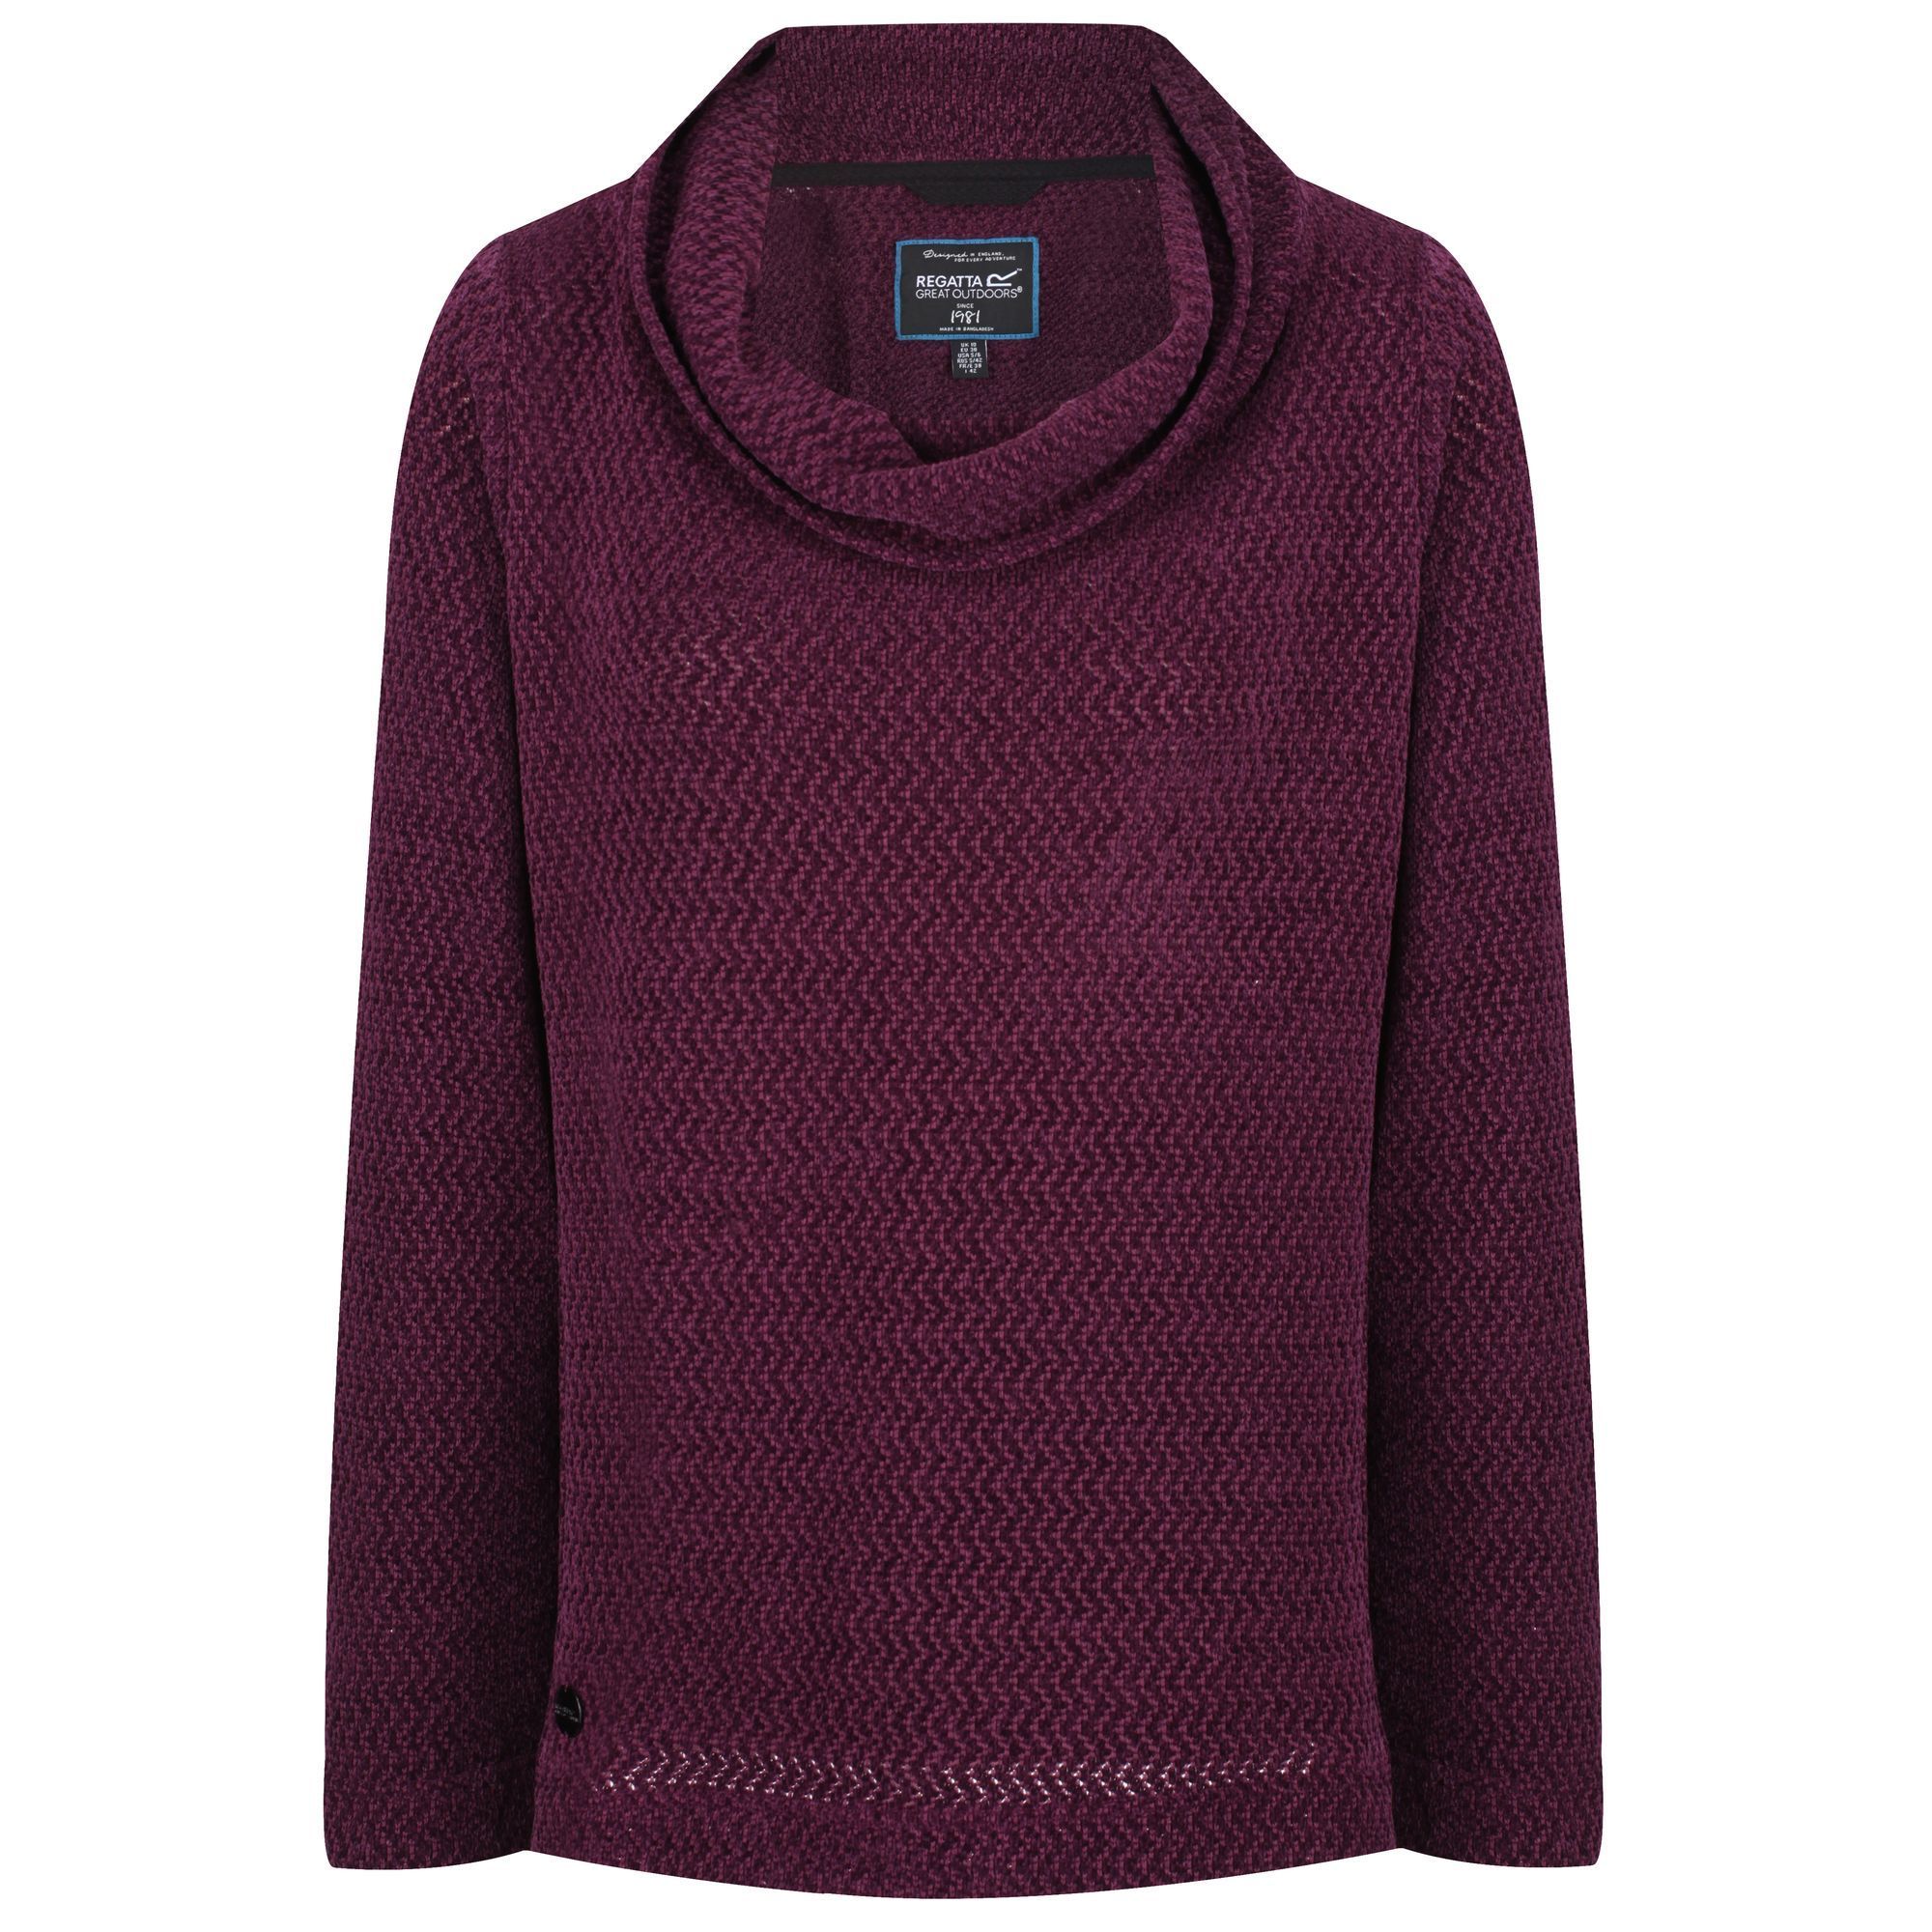 Material: 97% Polyester, 3% Elastane. Textured, loose knitted fleece. Hip length with a cowl neck.